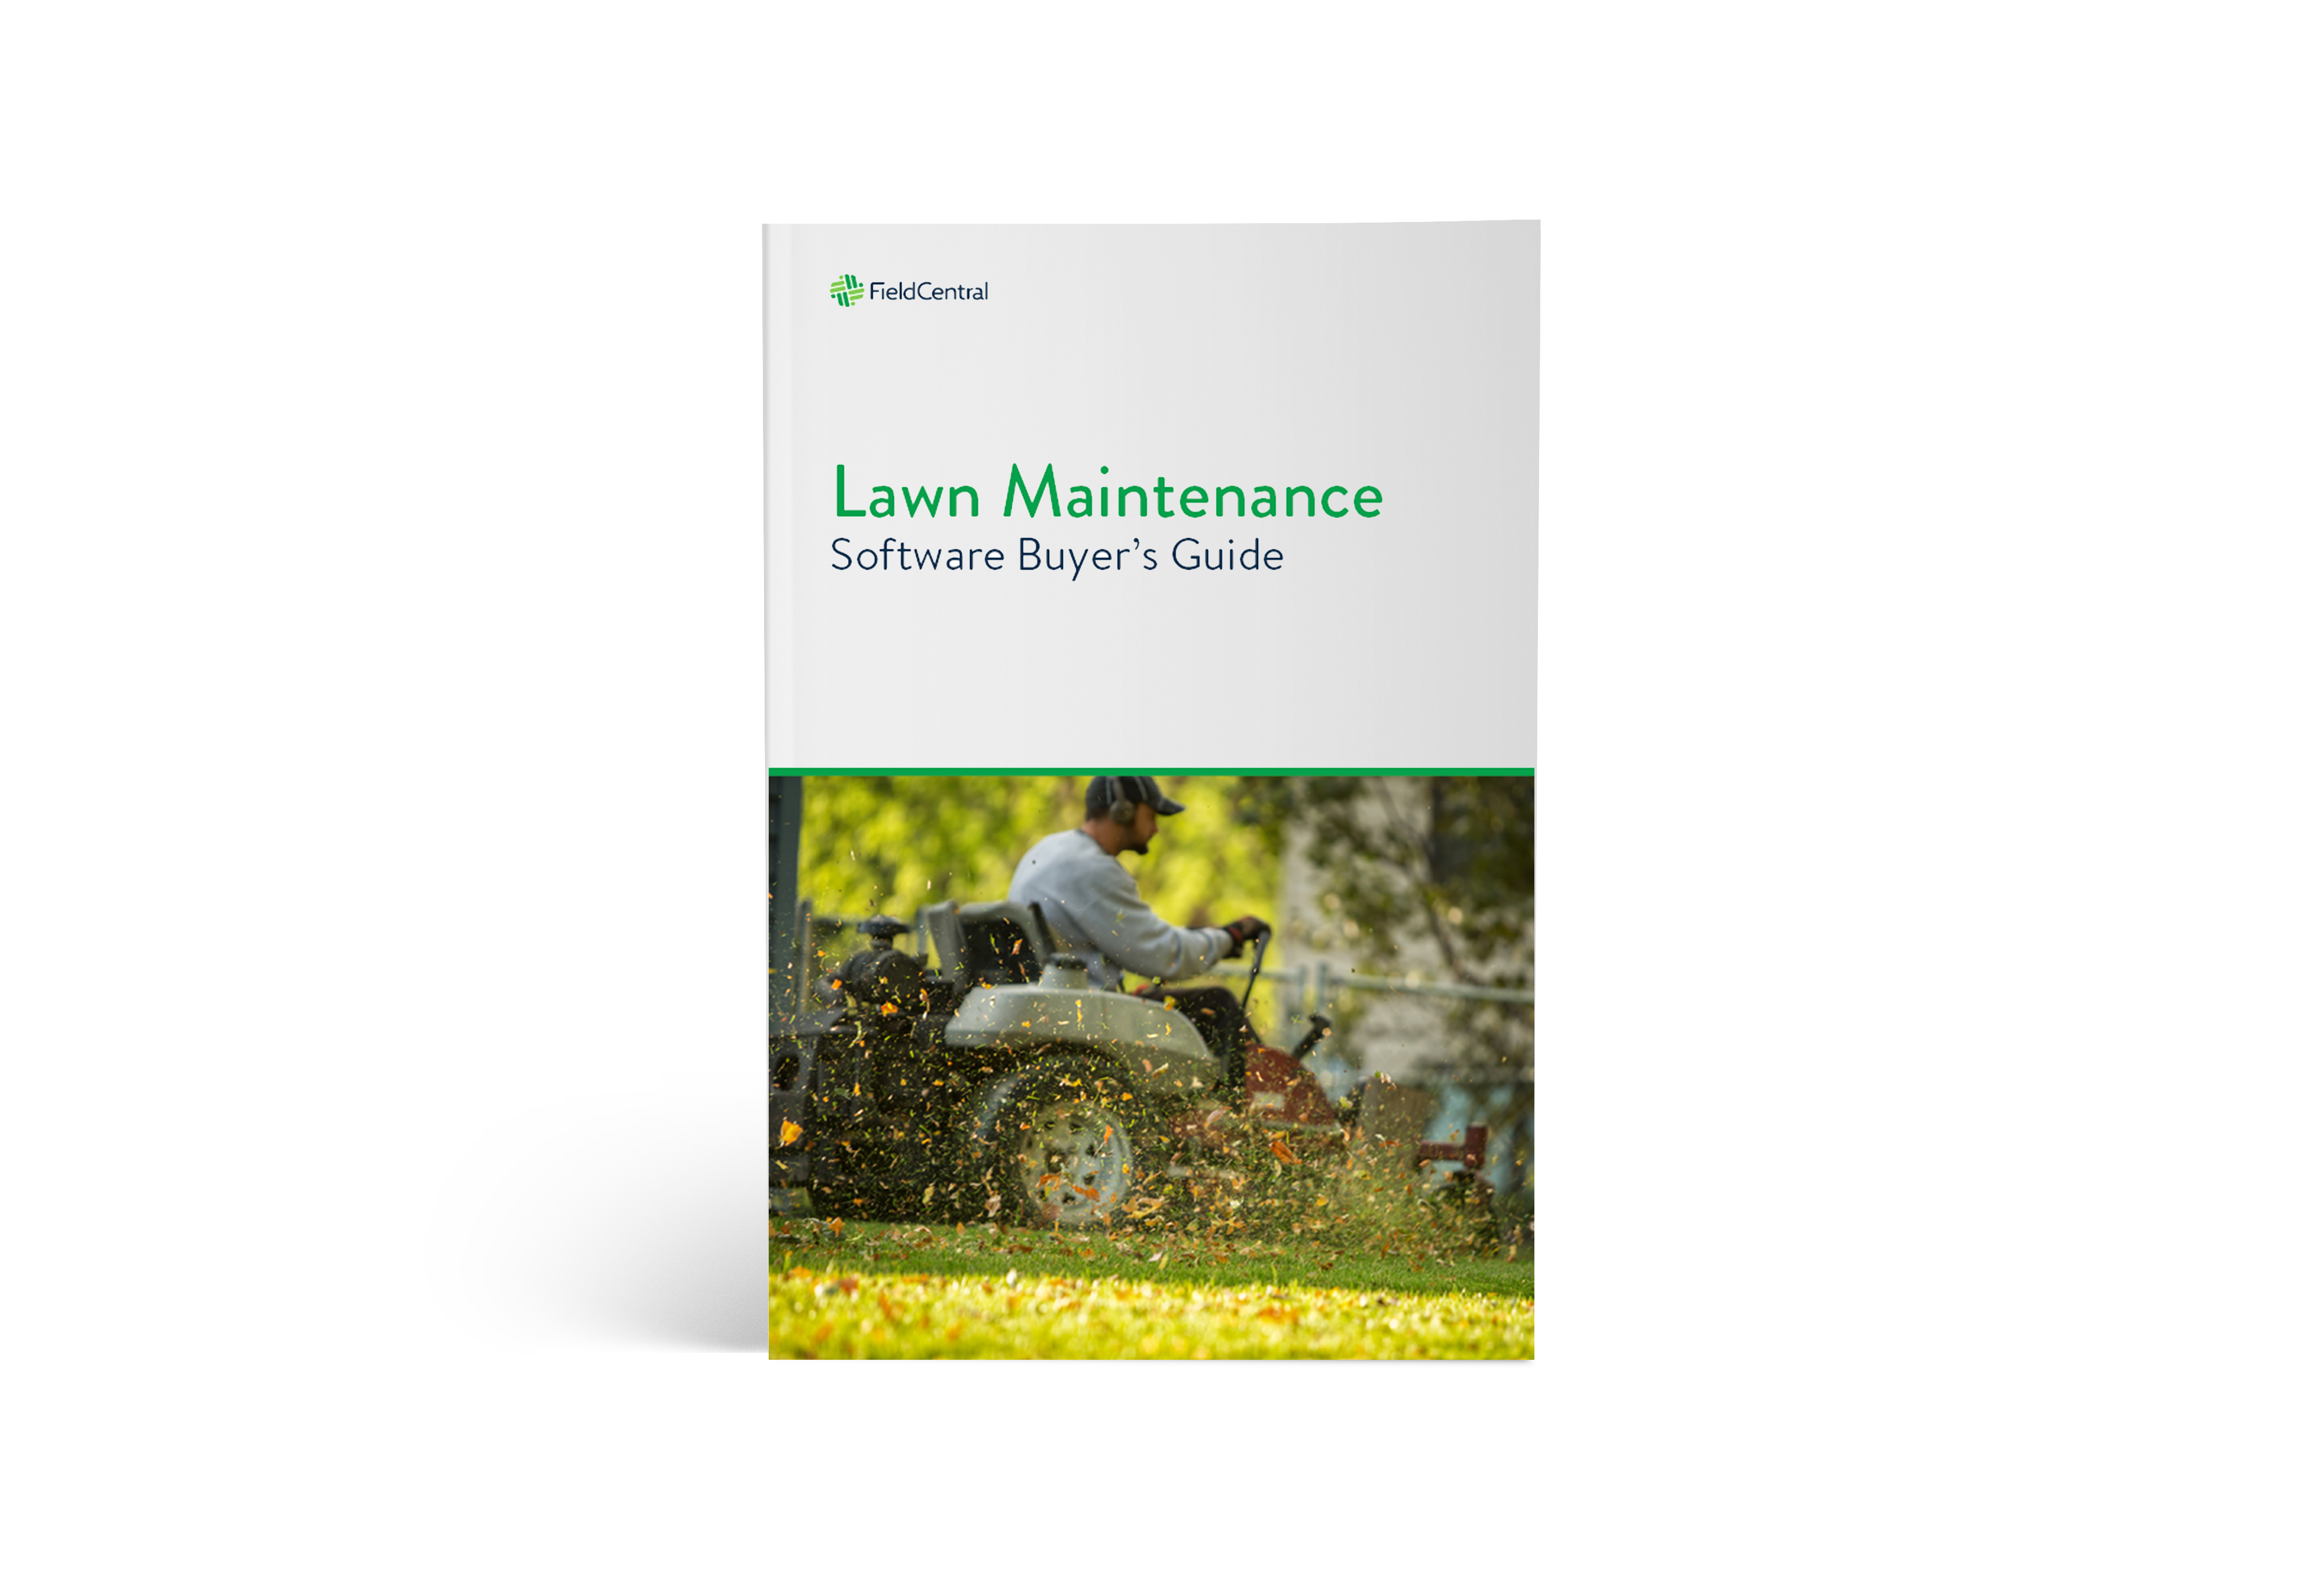 Lawn Maintenance Software Buyer's Guide ebook cover.